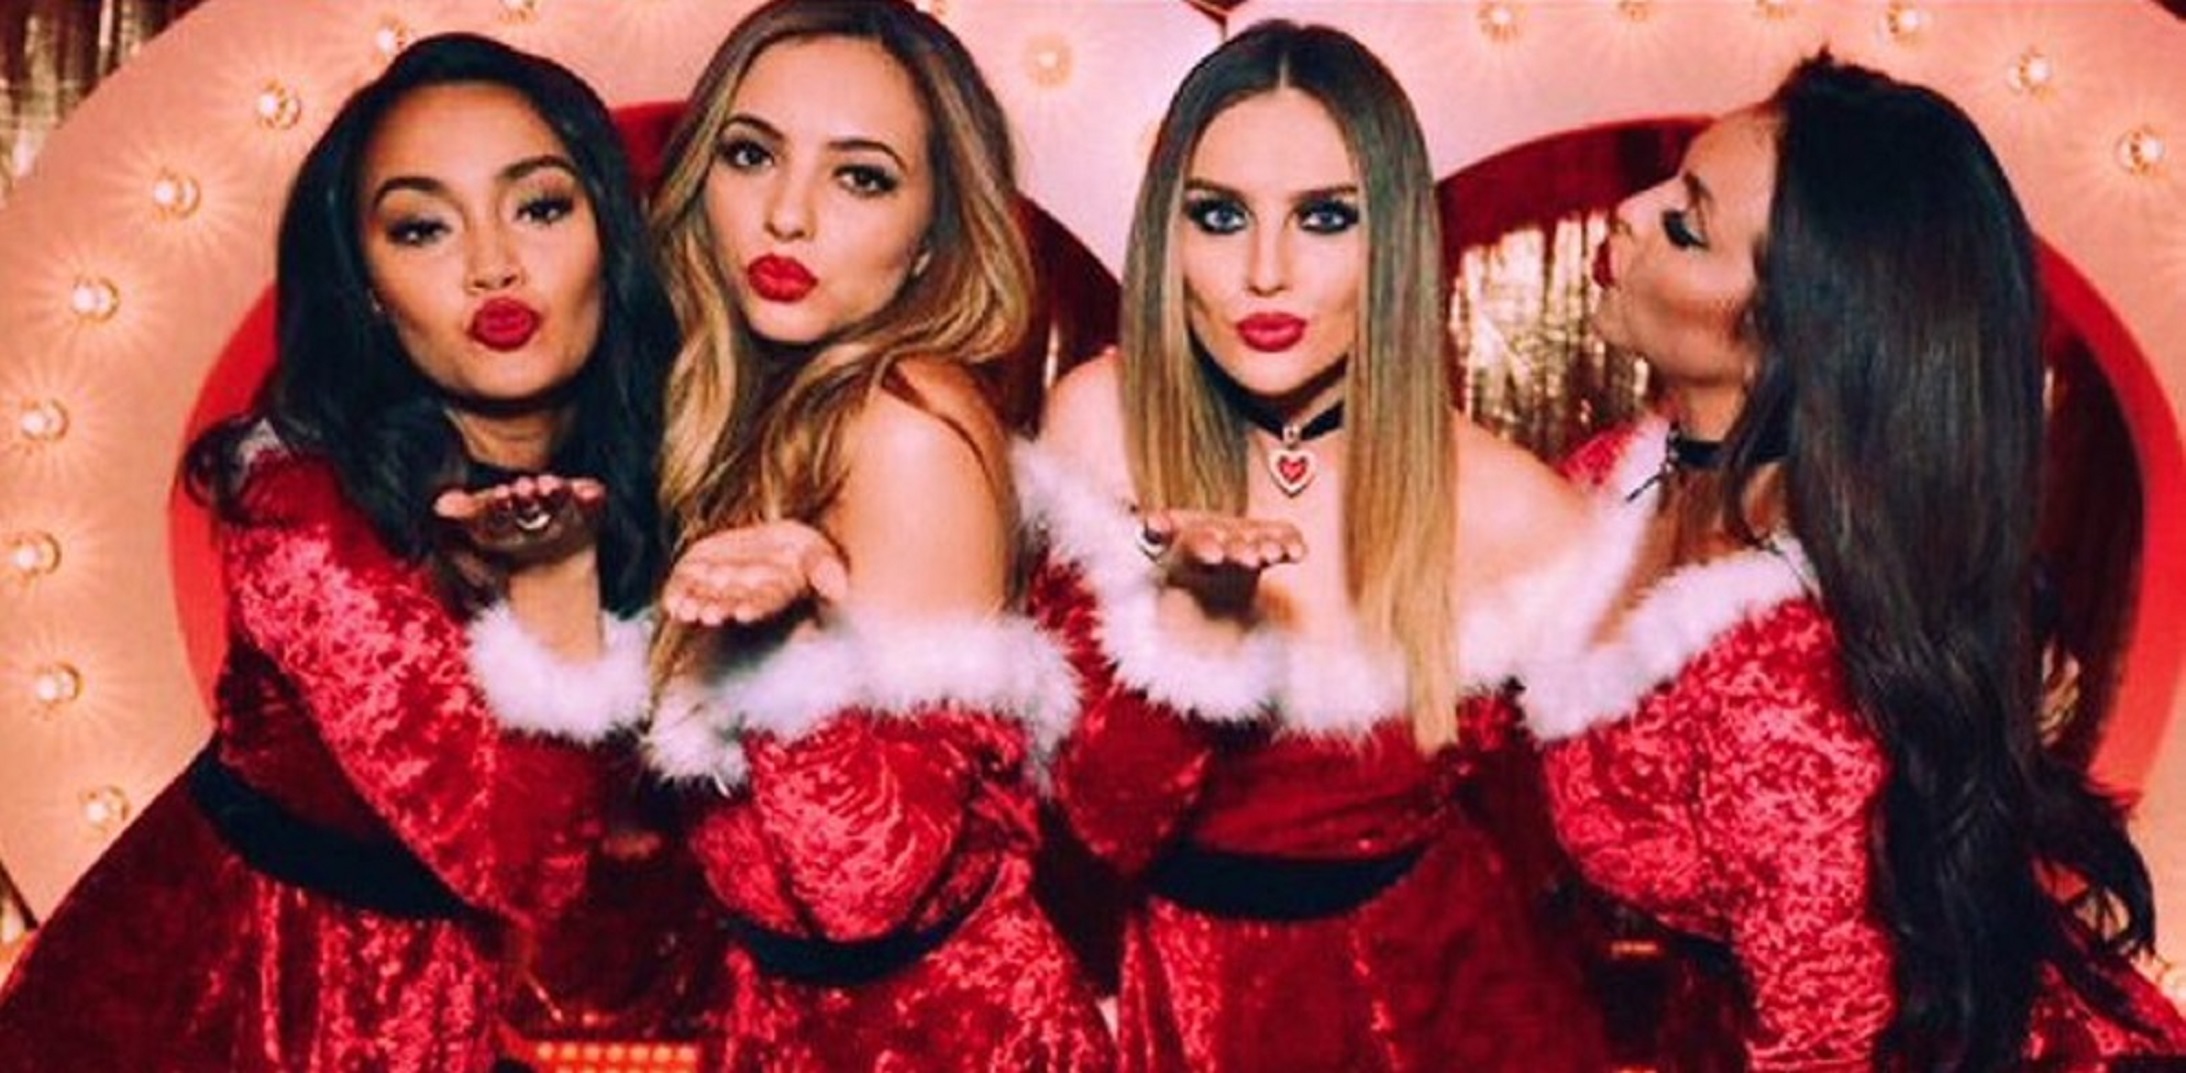 Watch: New Music Video From Little Mix, ‘One I’ve Been Missing’